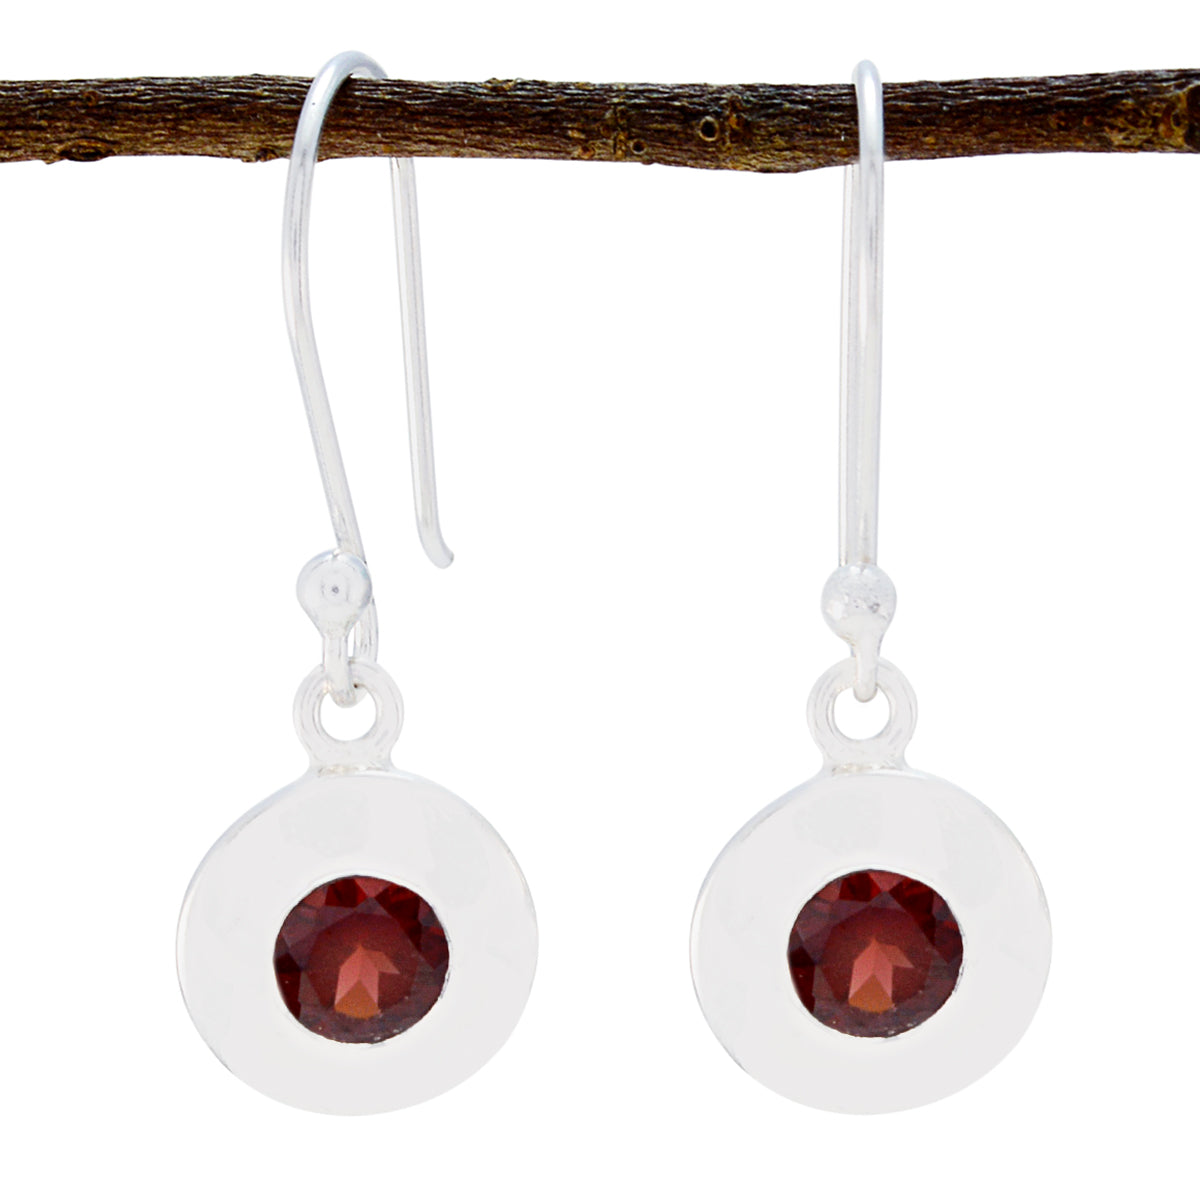 Riyo Natural Gemstone round Faceted Red Garnet Silver Earrings gift for black Friday